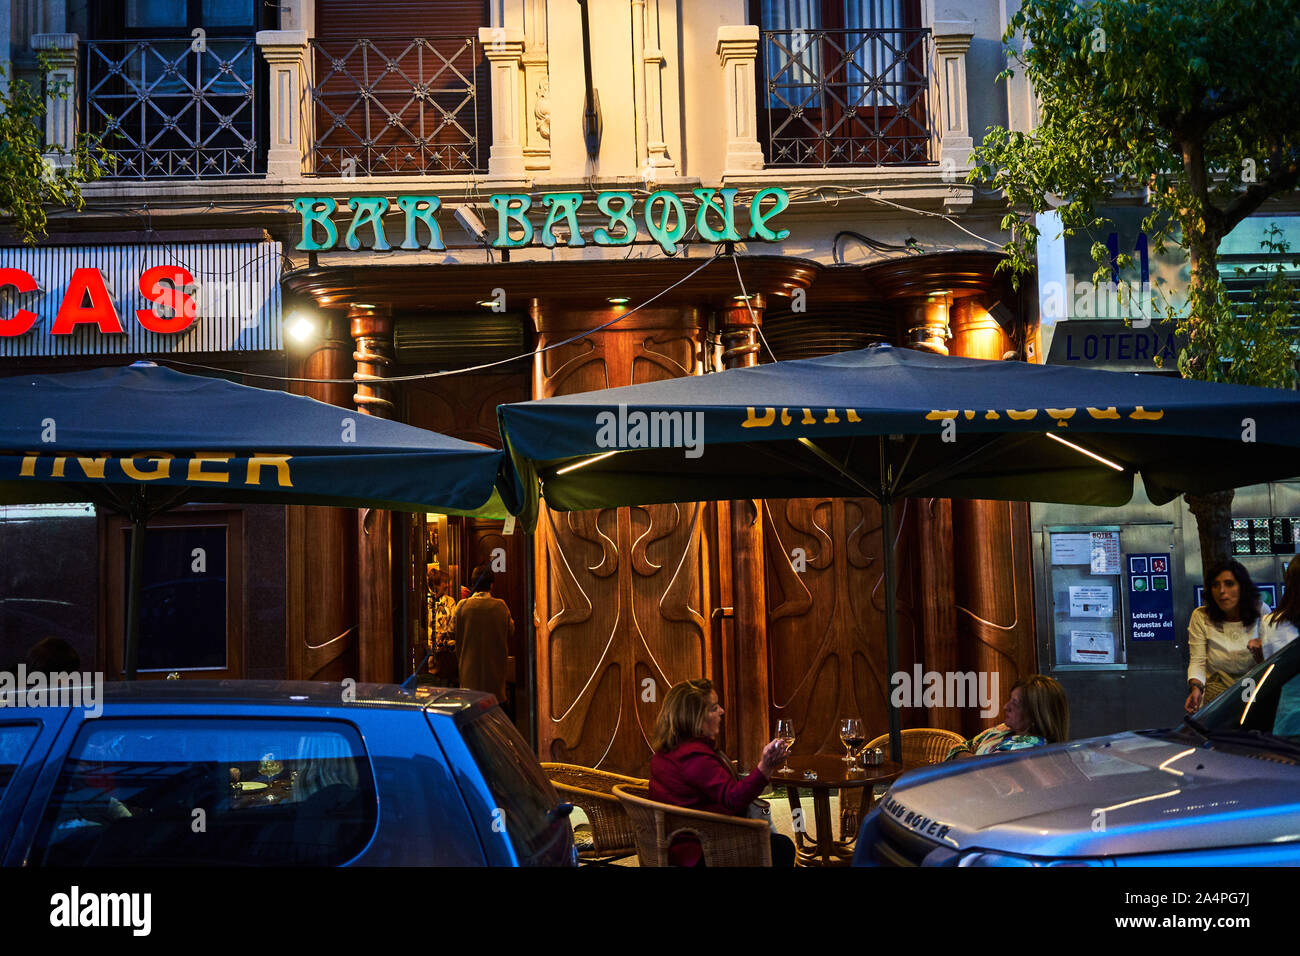 A view of Modernist Bar Basque from the street with it's iconic signage and wooden carved front Stock Photo